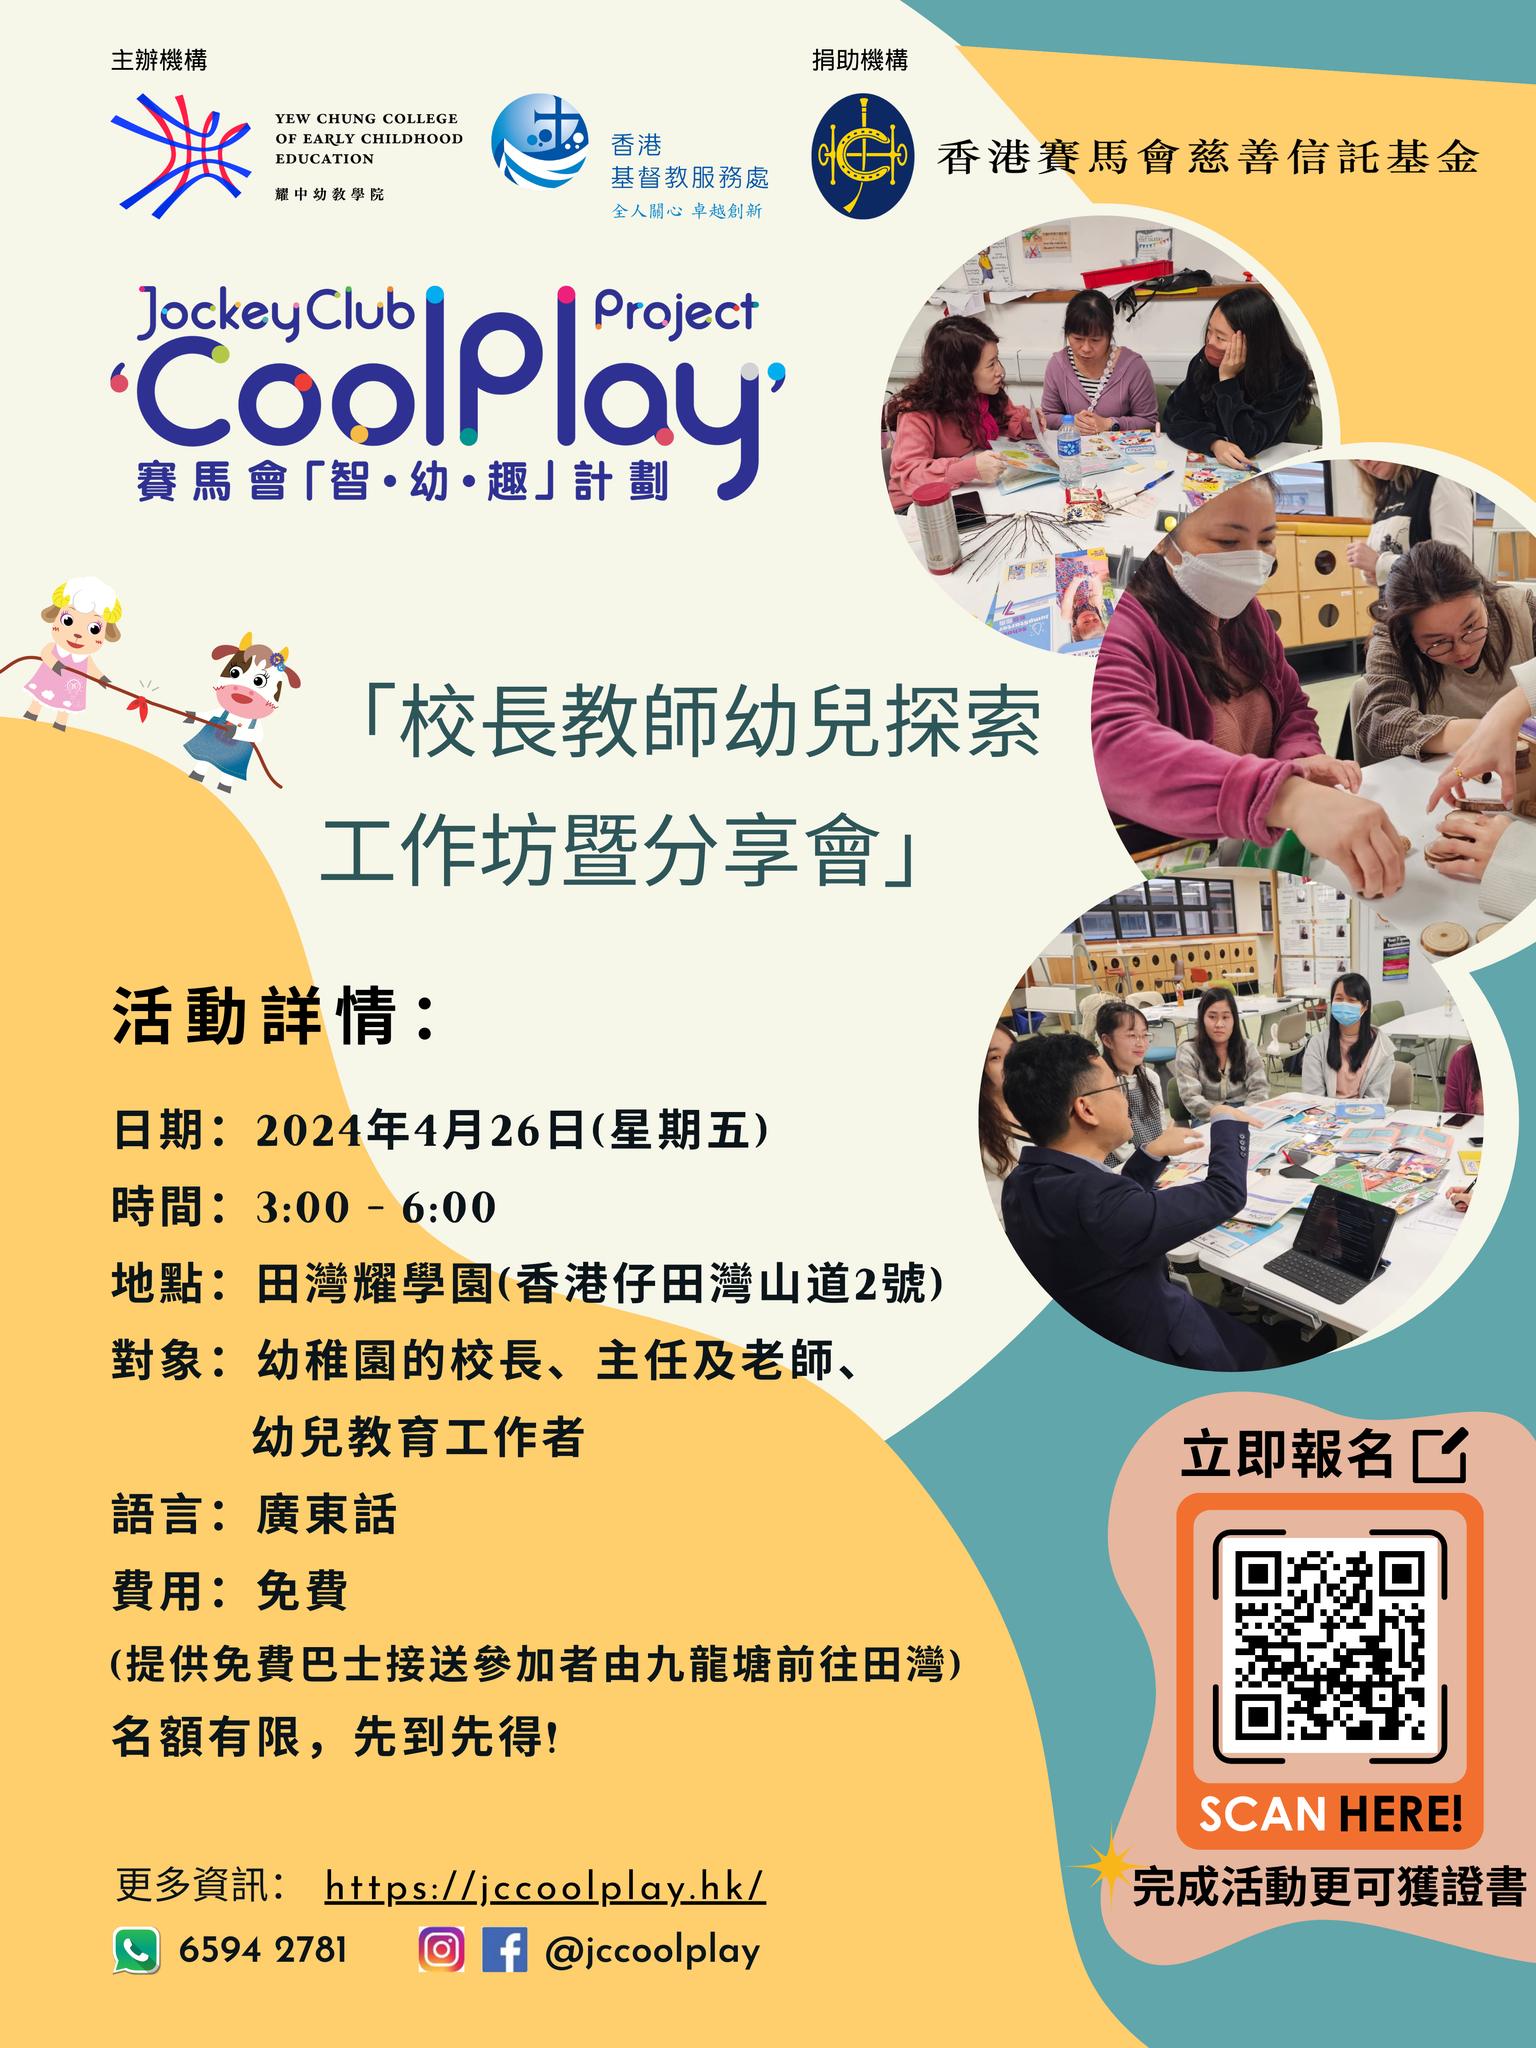 Children Play-based Learning Workshop for Principals and Teachers